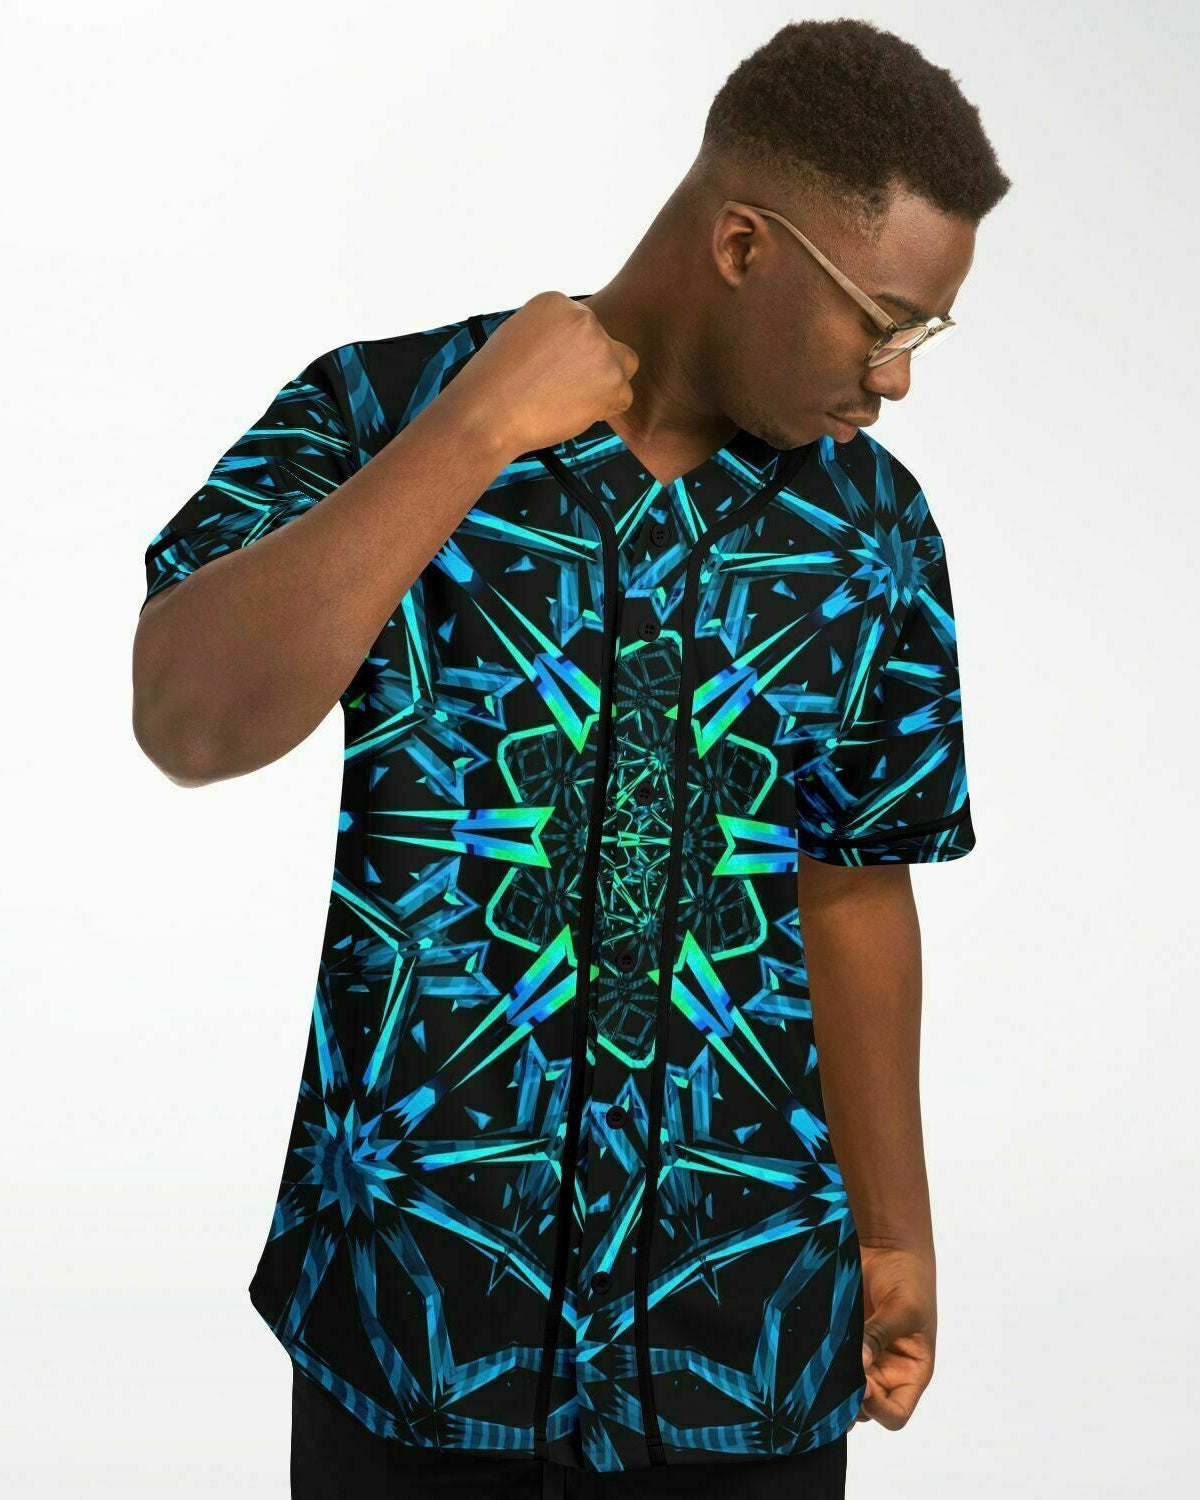 Male model showcasing the One Stop Rave Fractals Baseball Jersey